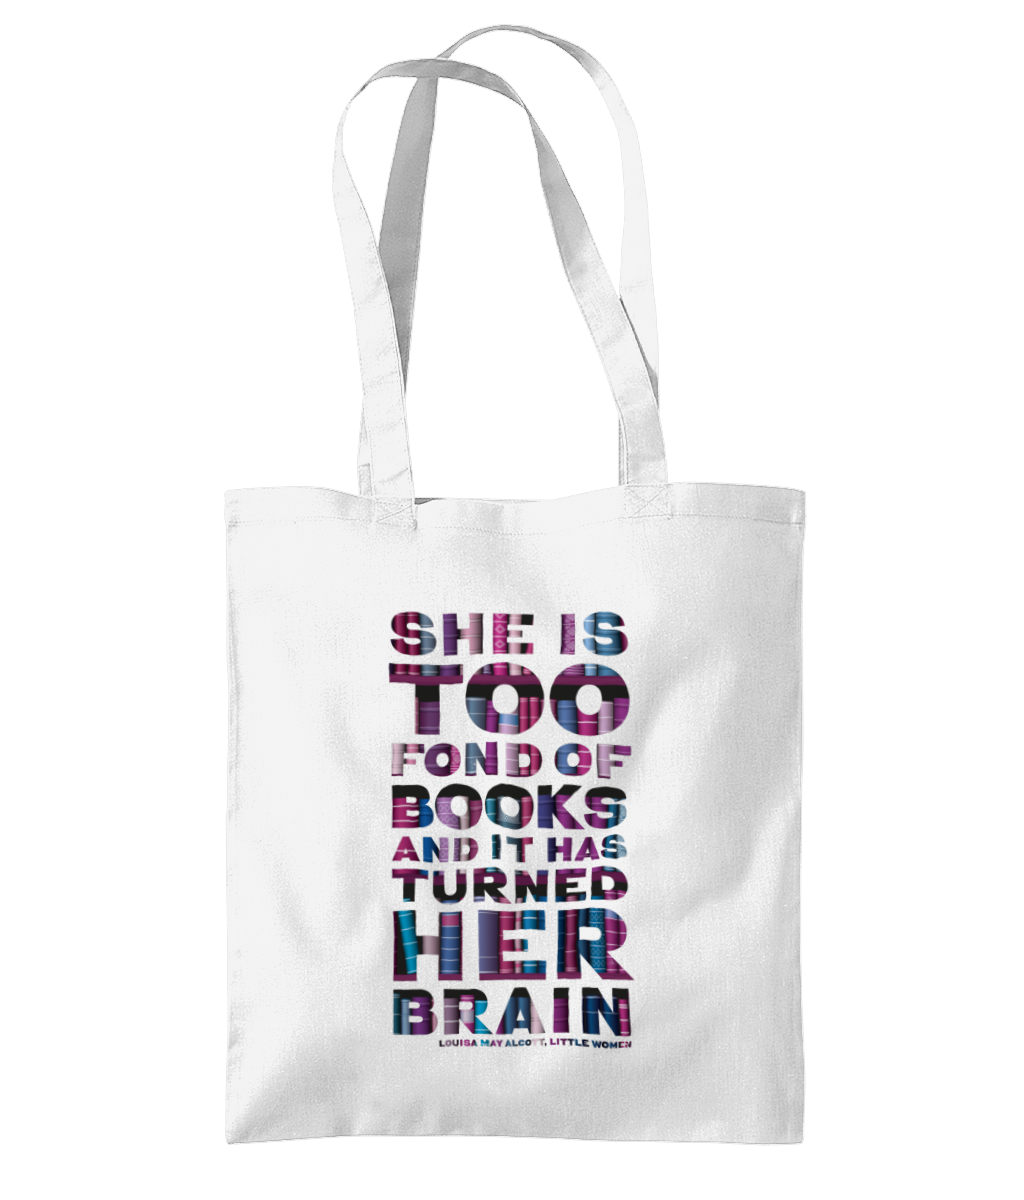 Shoulder Tote Bag She is too fond of books it has turned her brain.